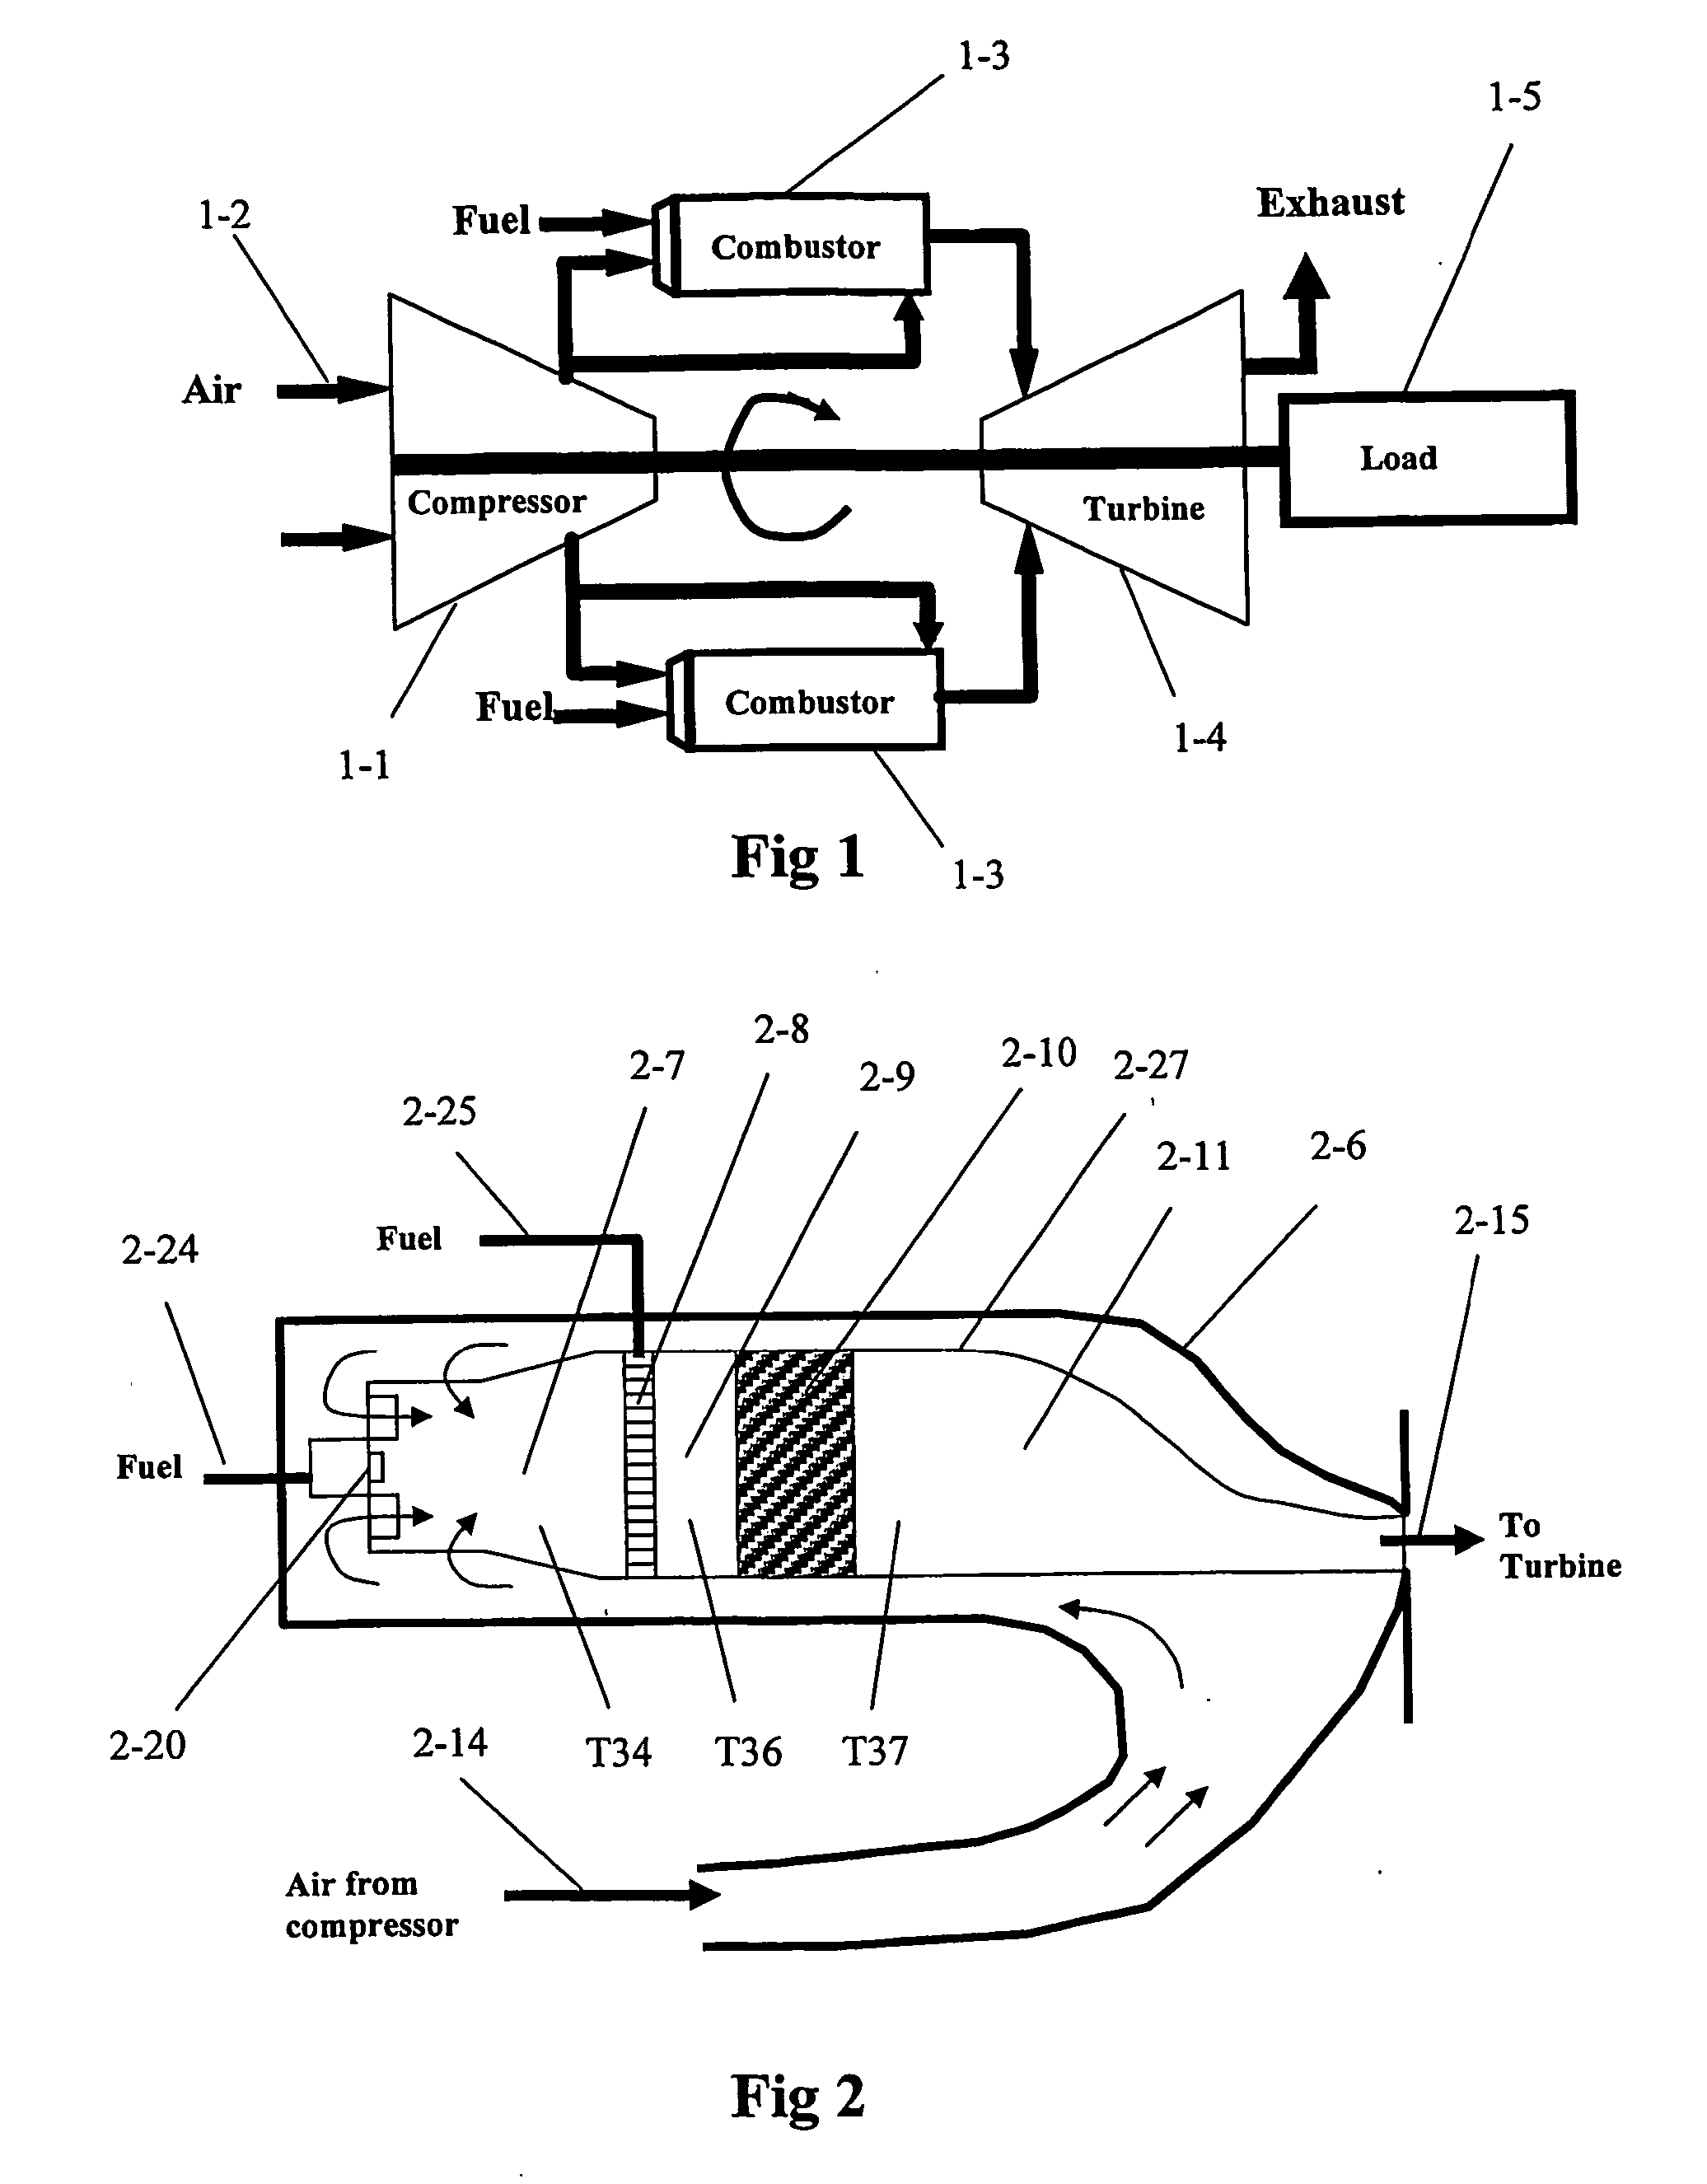 Catalyst module overheating detection and methods of response